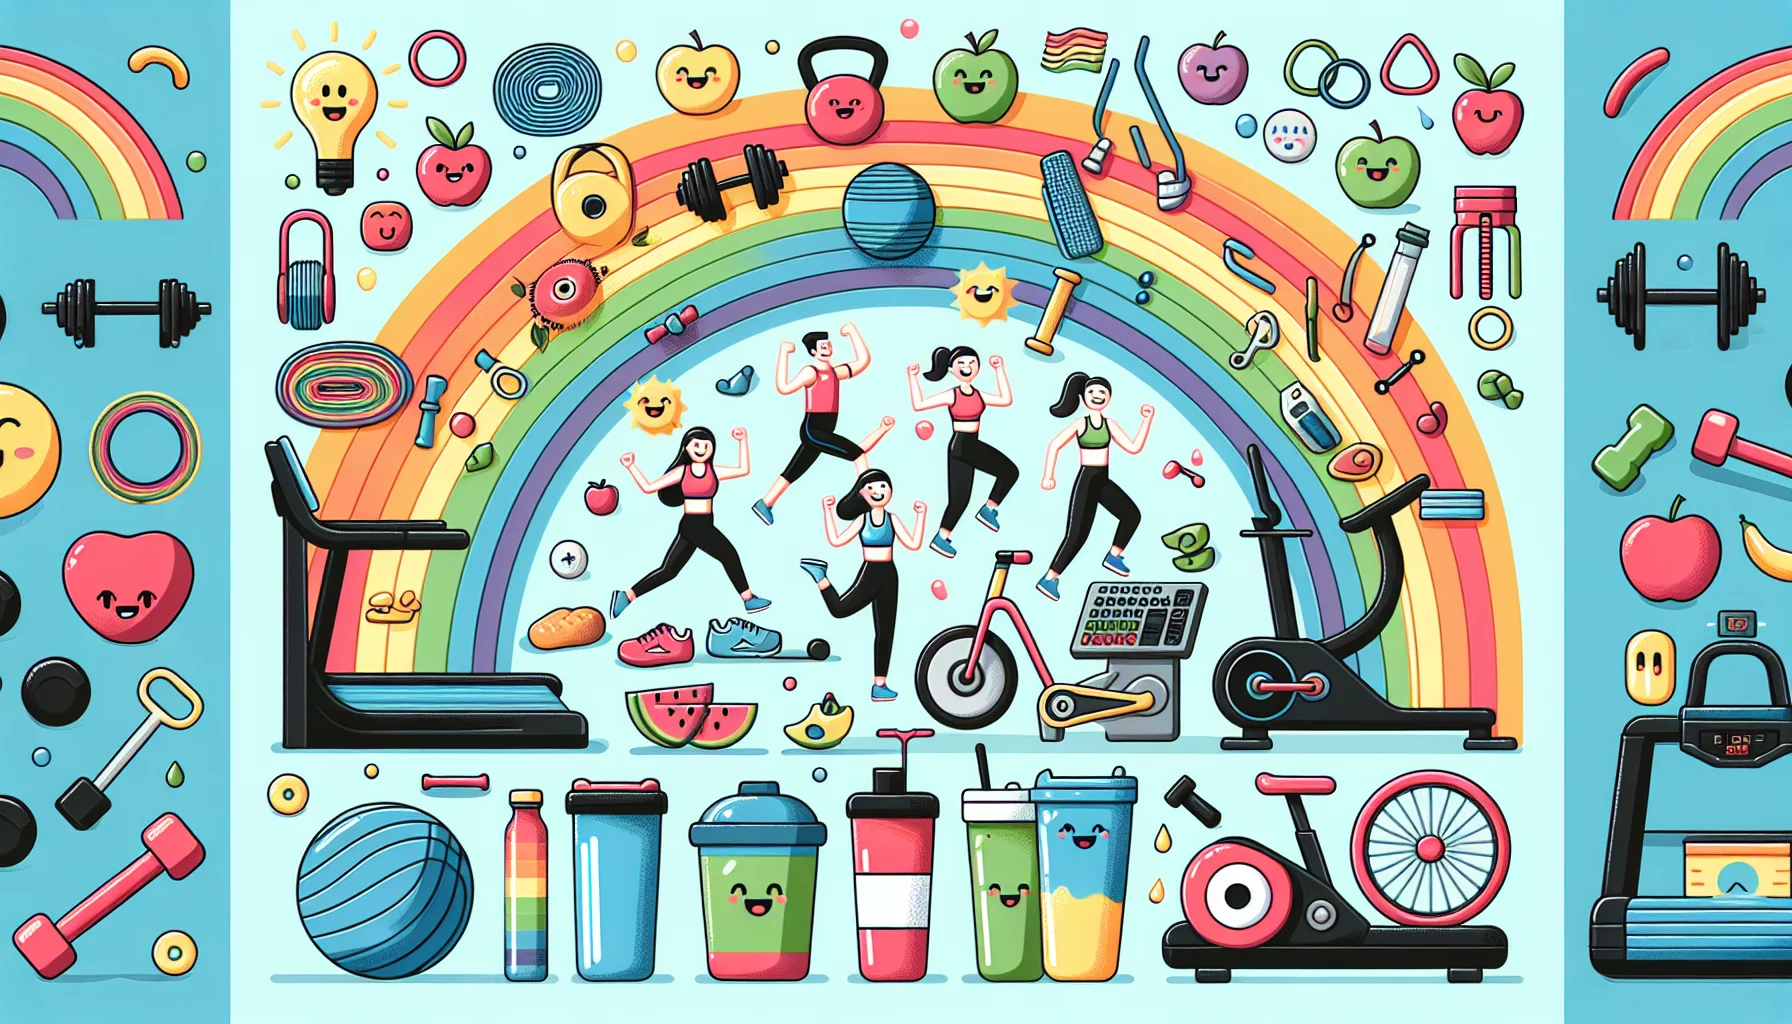 Create an engaging and humorous image that depicts various essential items for a fitness journey. The setting is in a colorful gym. Feature a variety of fitness equipment like resistance bands, weights, and a yoga mat, along with some amusing elements like cute cartoon weights with faces and an exercise bike with a rainbow trail coming out from it. Also incorporate healthy foods like apples, water bottle, and protein shakes. Portray people of diverse descents and genders actively exercising, laughing, and having a great time while using the equipment and essential items.